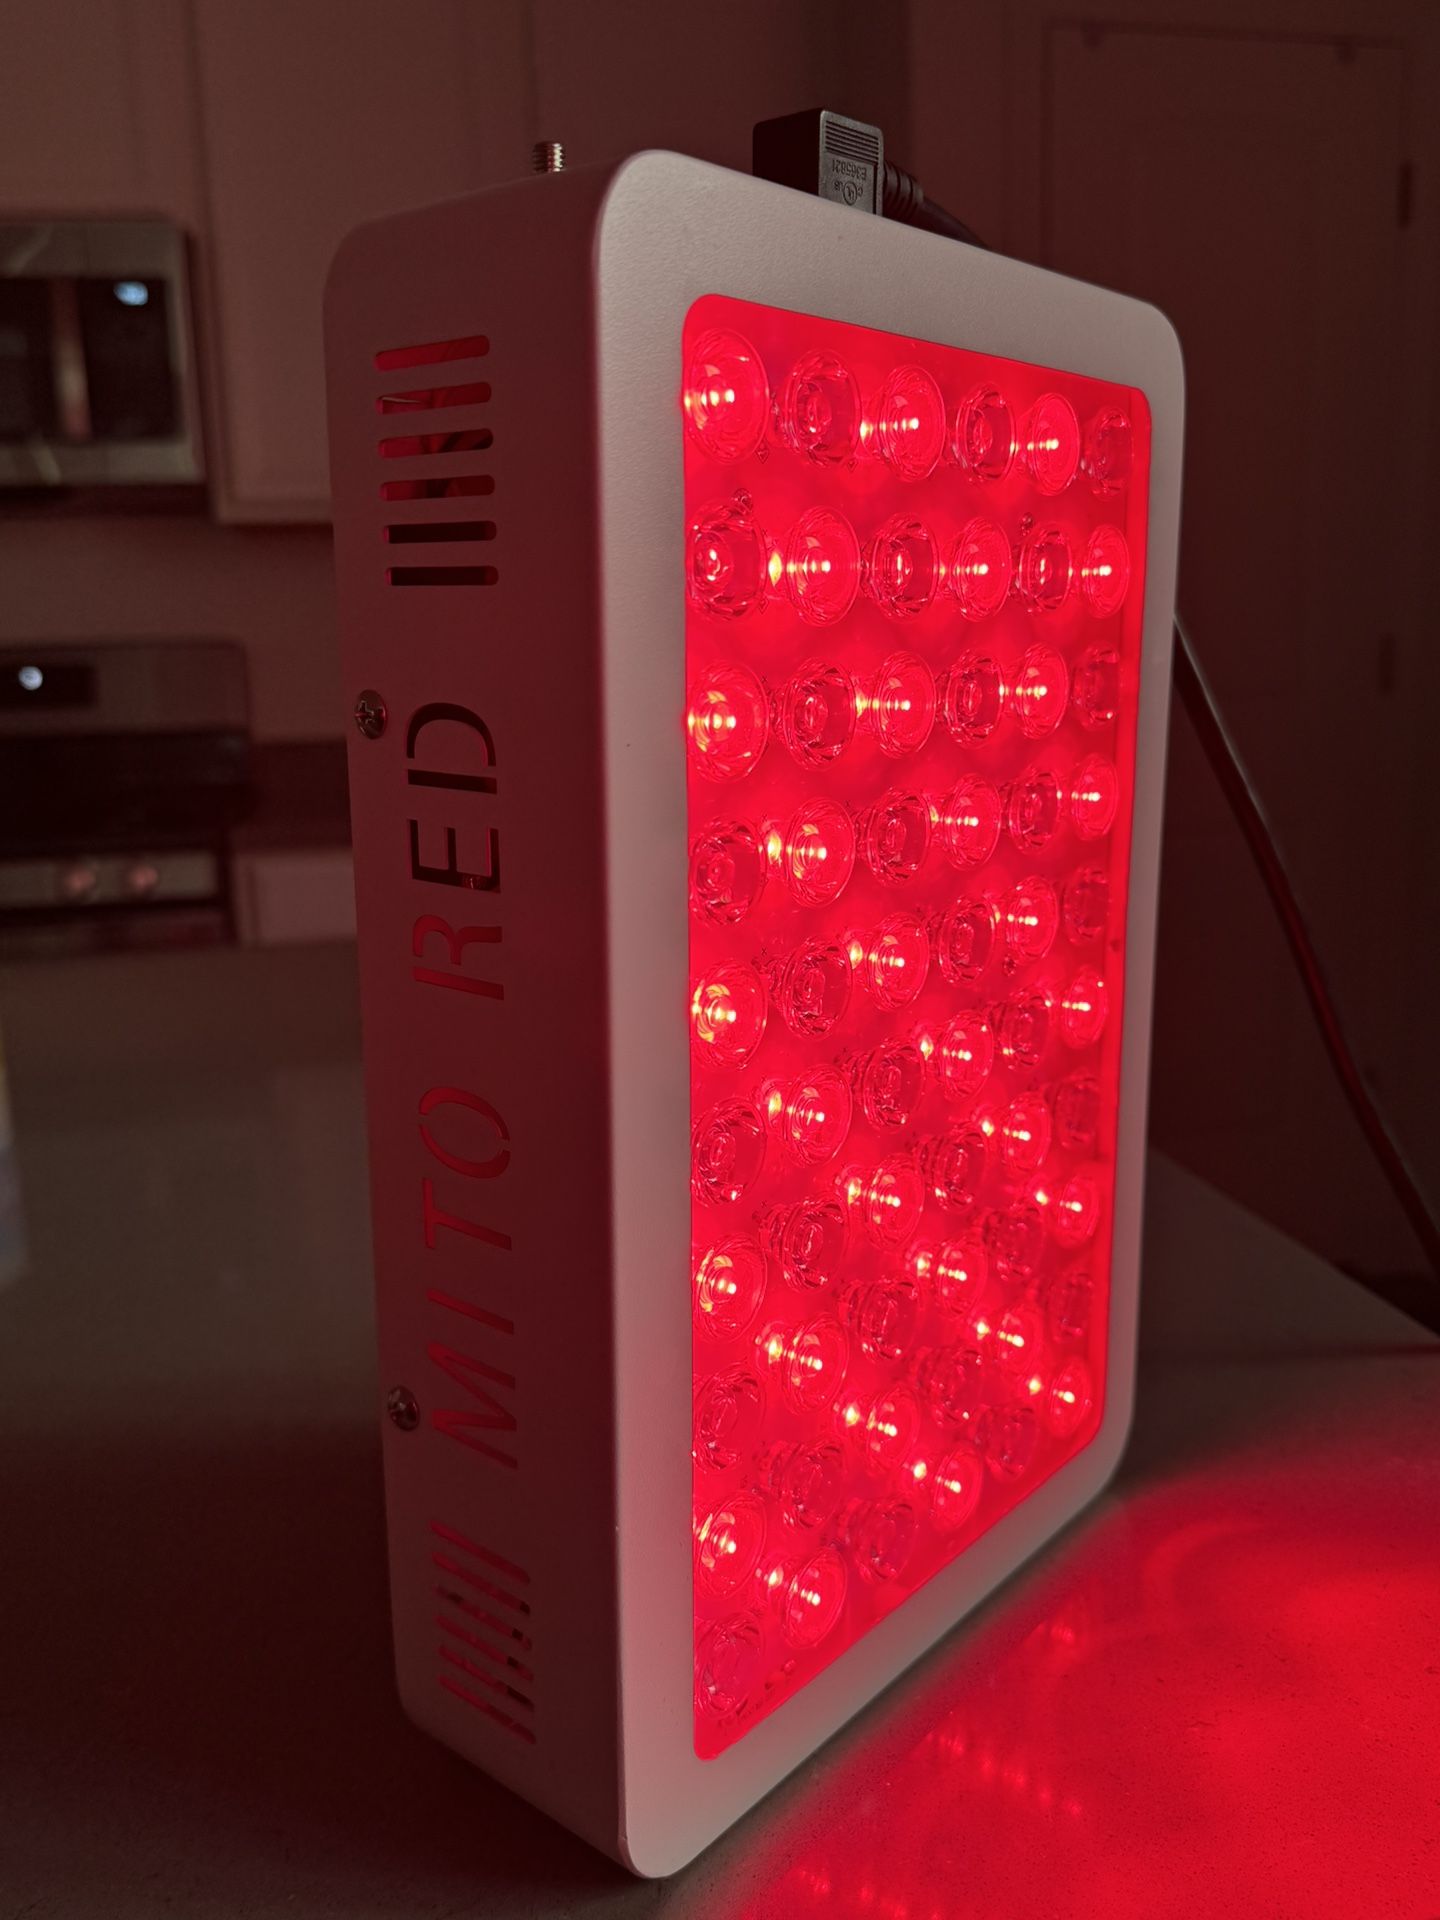 MITO RED LIGHT THERAPY PANEL MITOMIN: FOR FACE, BODY, NECK 12.25" X 8.25" X 2.75"